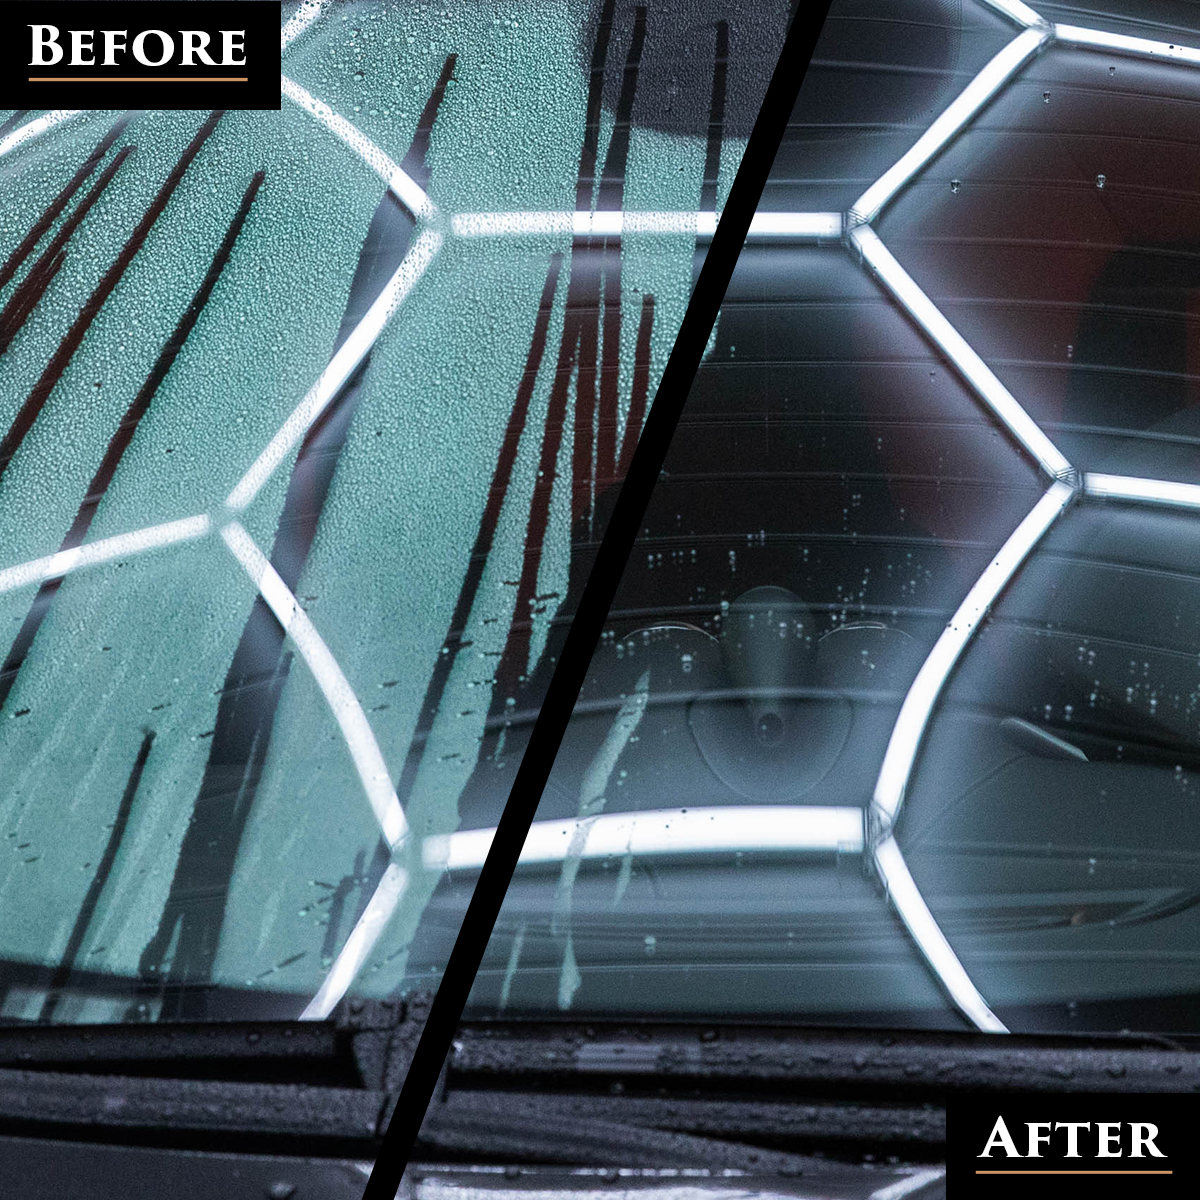 Image showing before and after when using Car Gods Crystal Shield Rain Guard. Before image shows condensation and rain lingering on car windows. After image shows water beading on and running off the window surface.